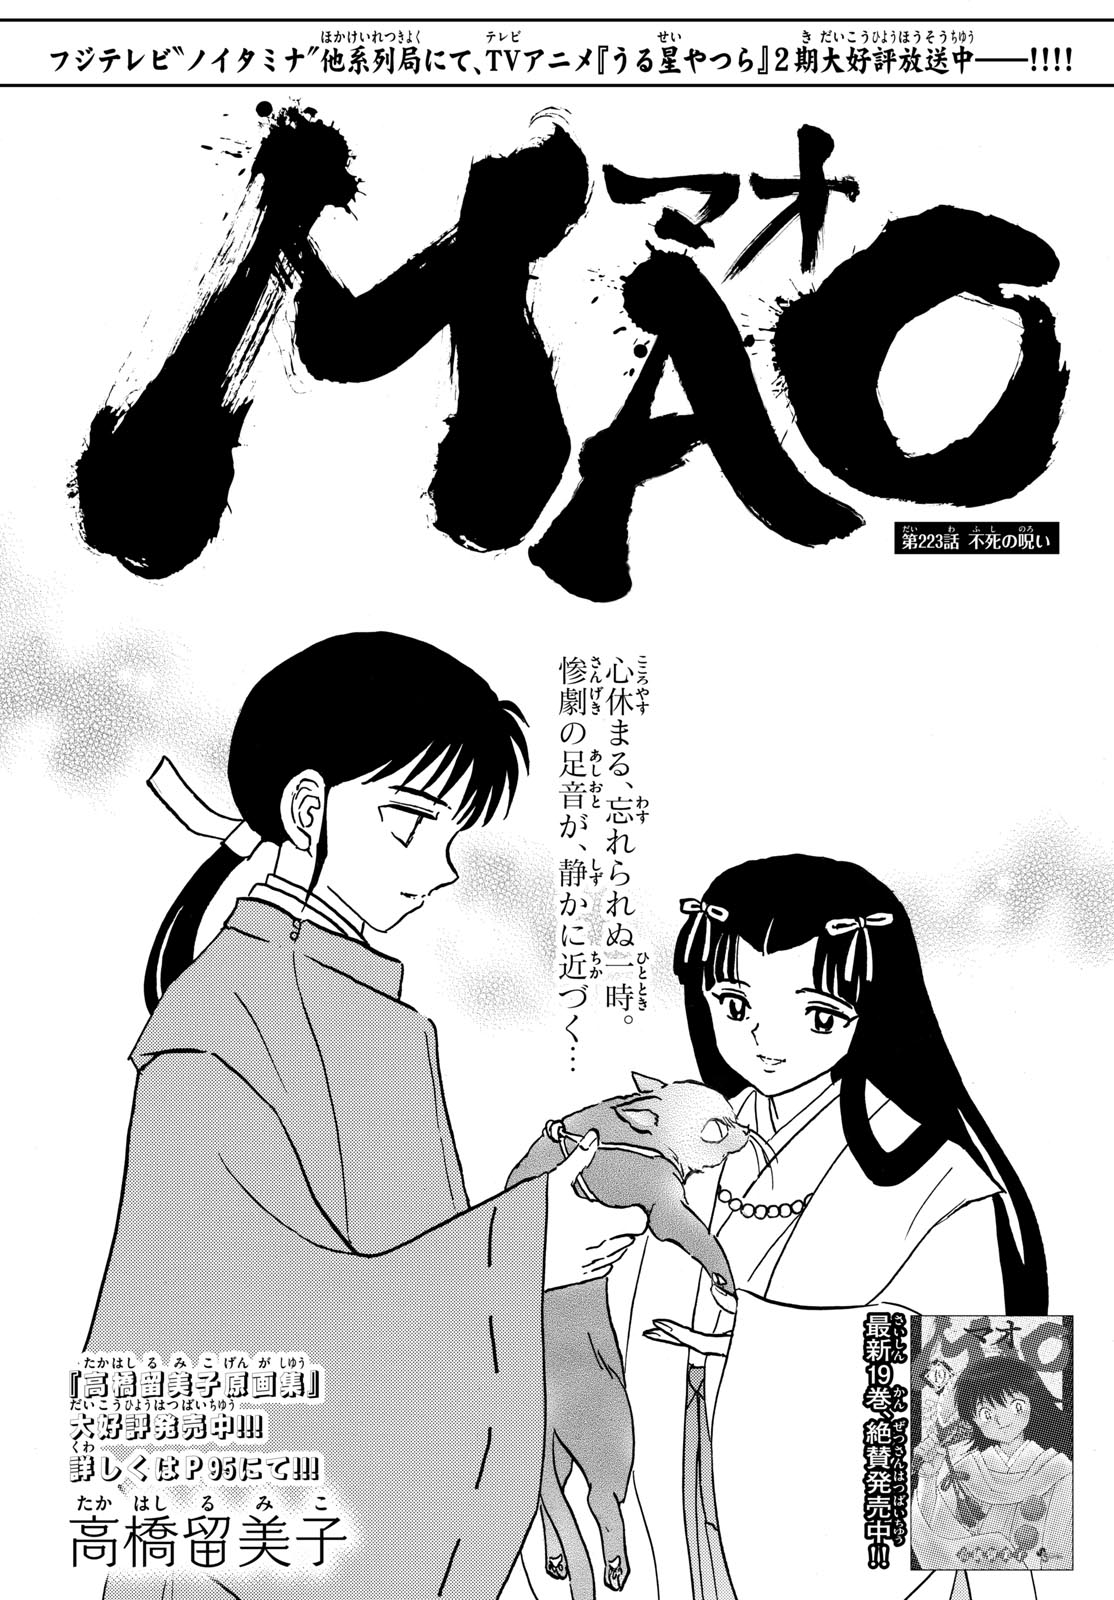 MAO - Chapter 223 - Page 1